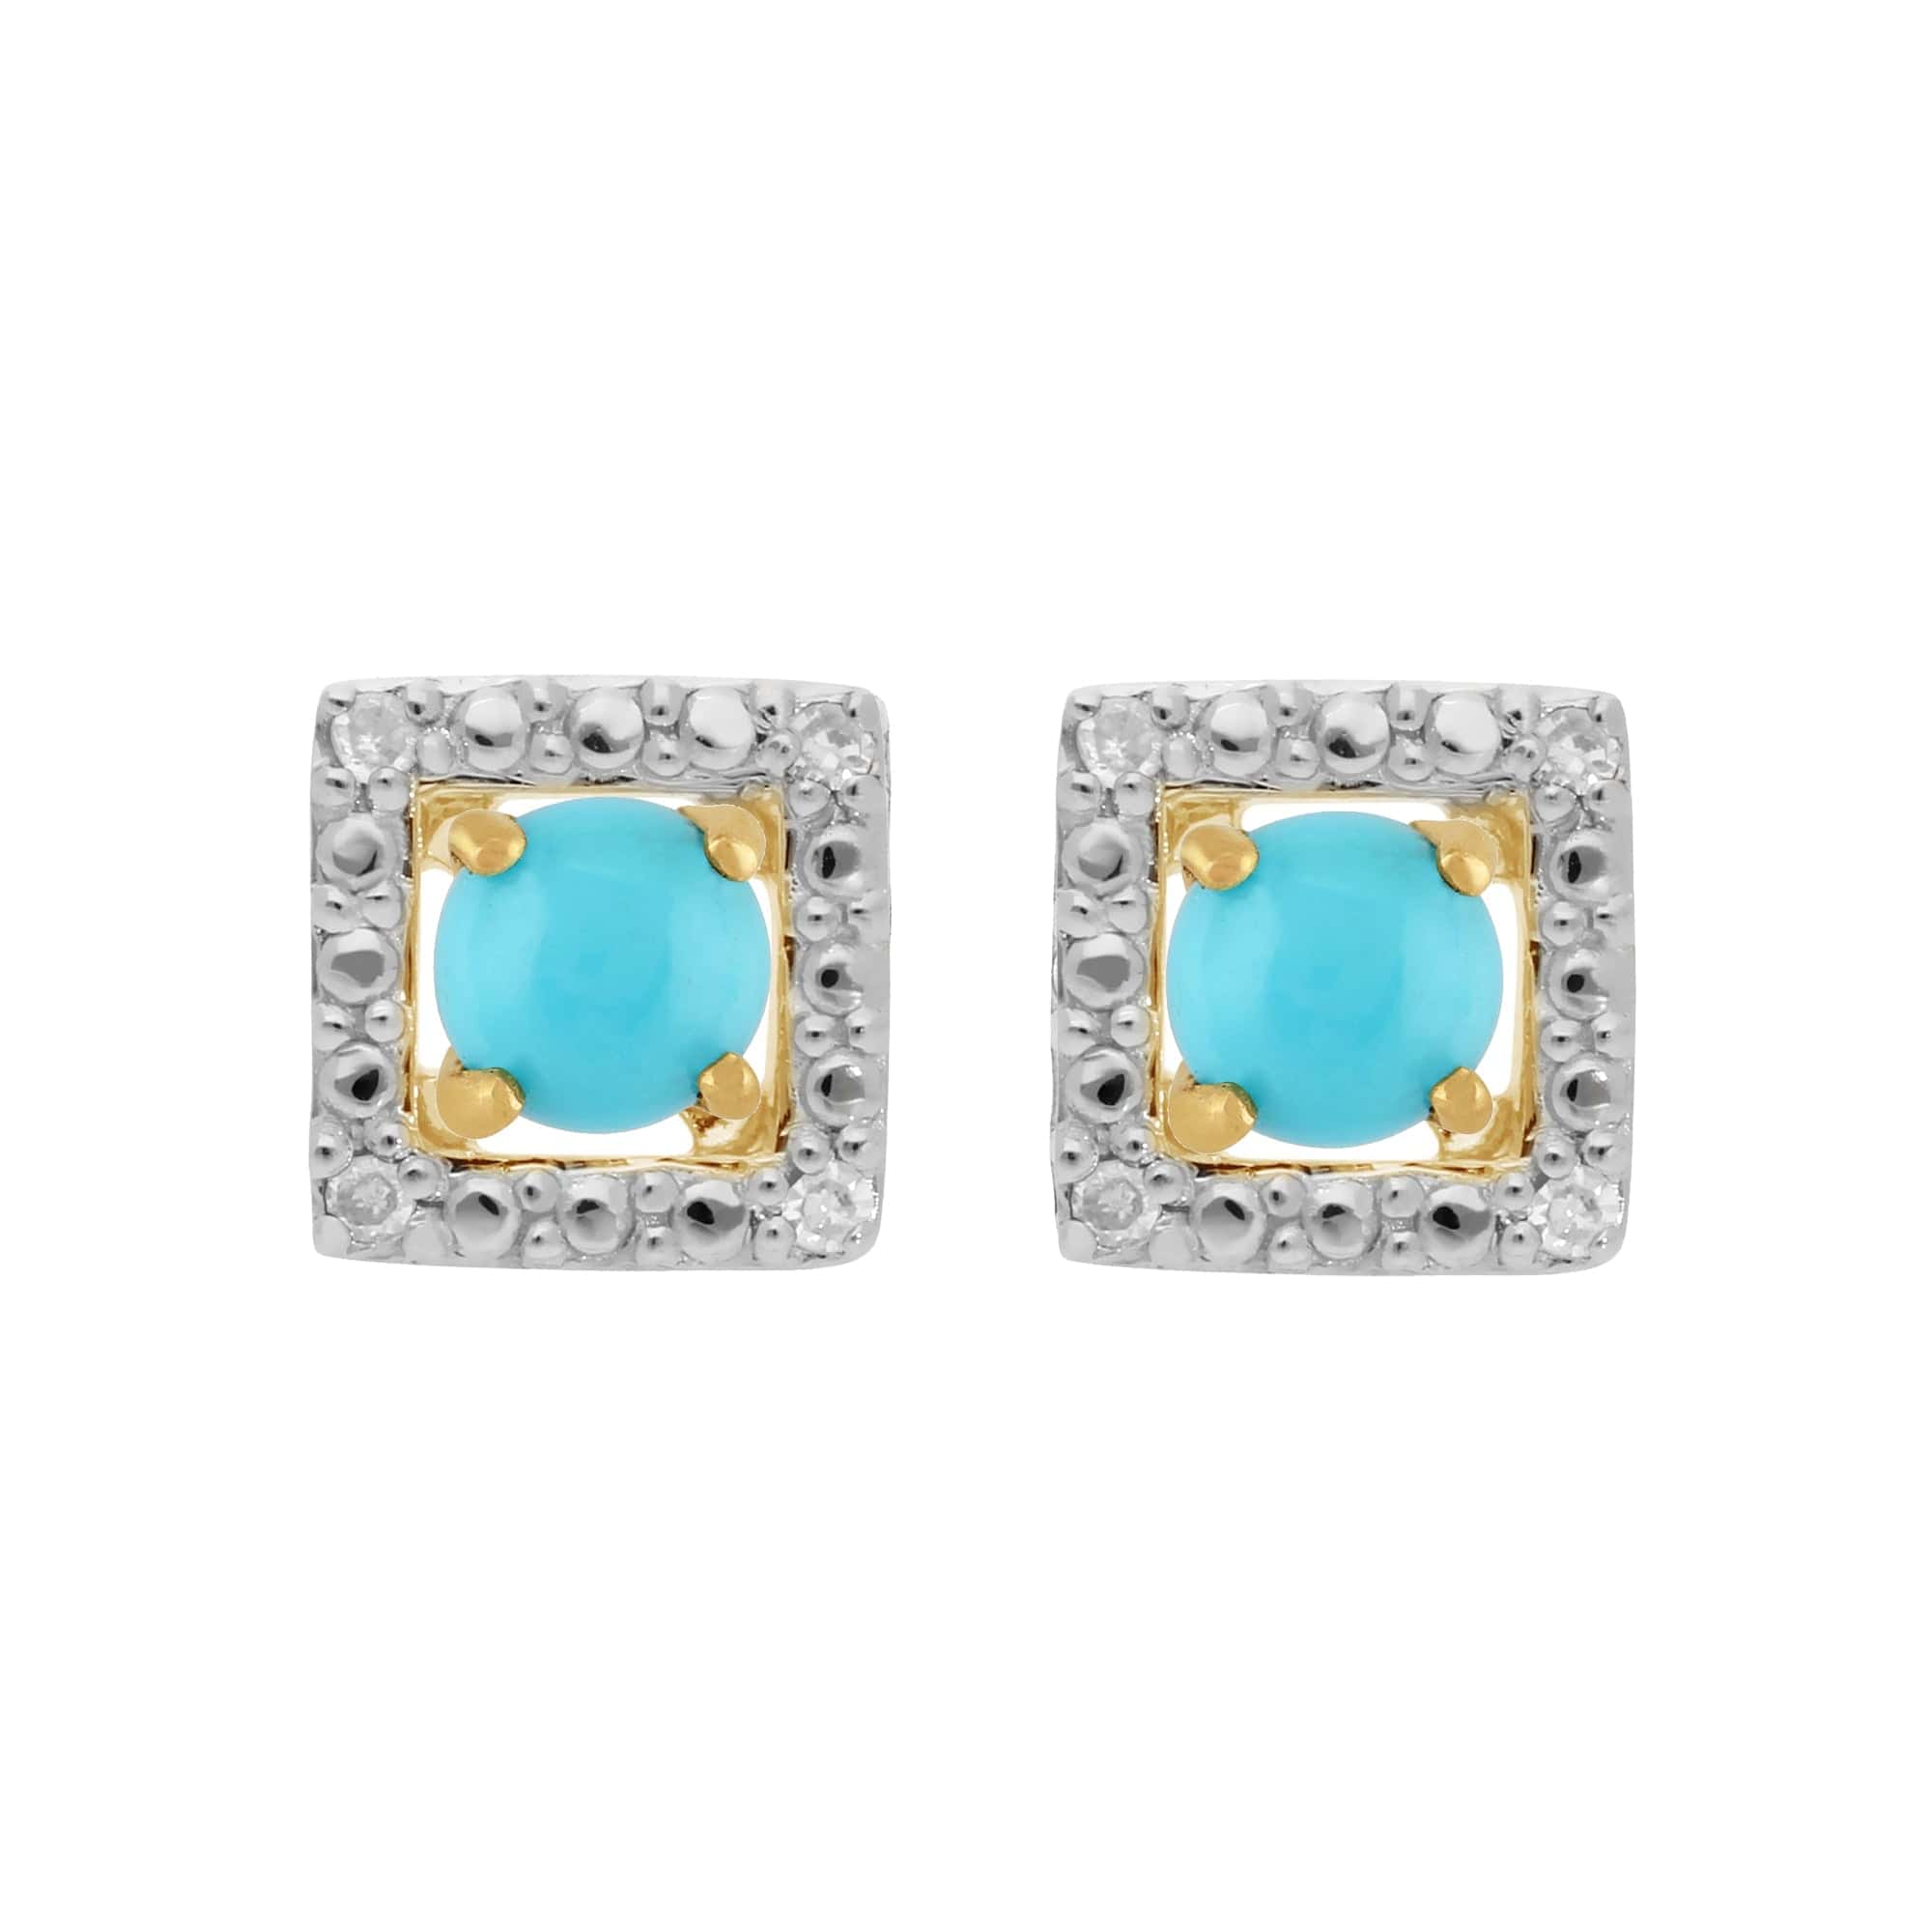 26945-191E0379019 Classic Round Turquoise Stud Earrings with Detachable Diamond Square Earrings Jacket Set in 9ct Yellow Gold 1